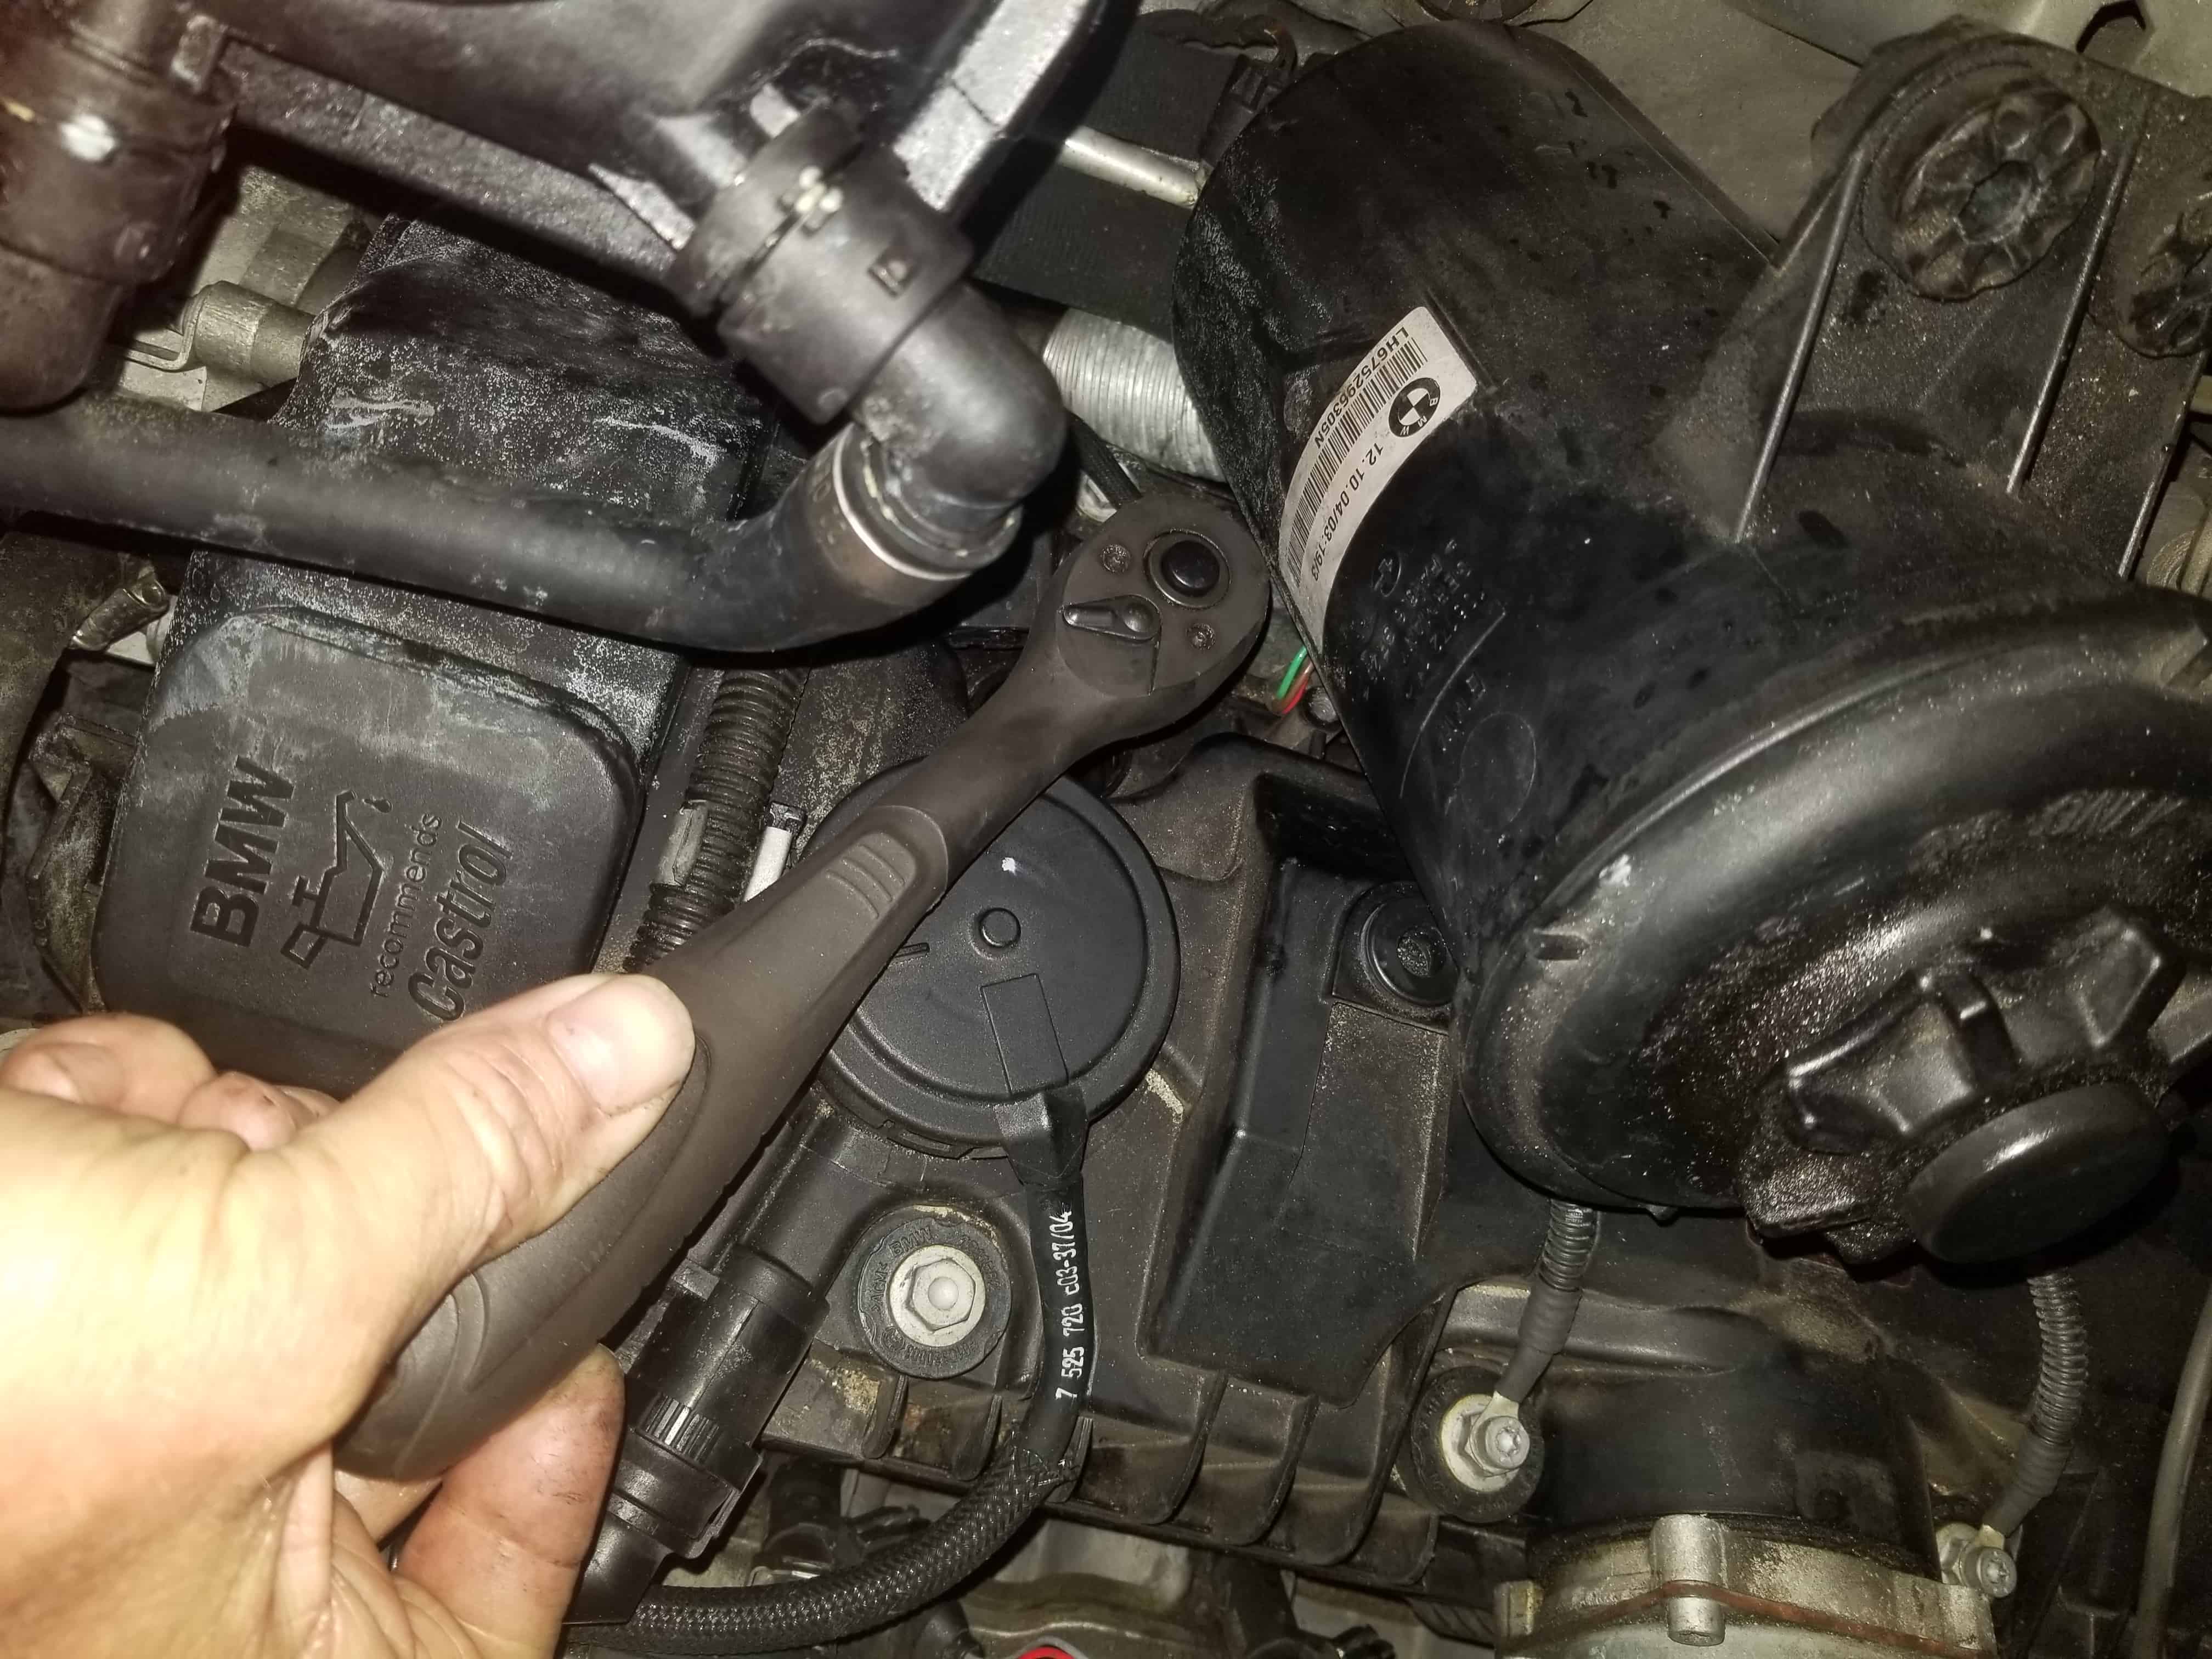 Remove the spark plug from cylinder 1